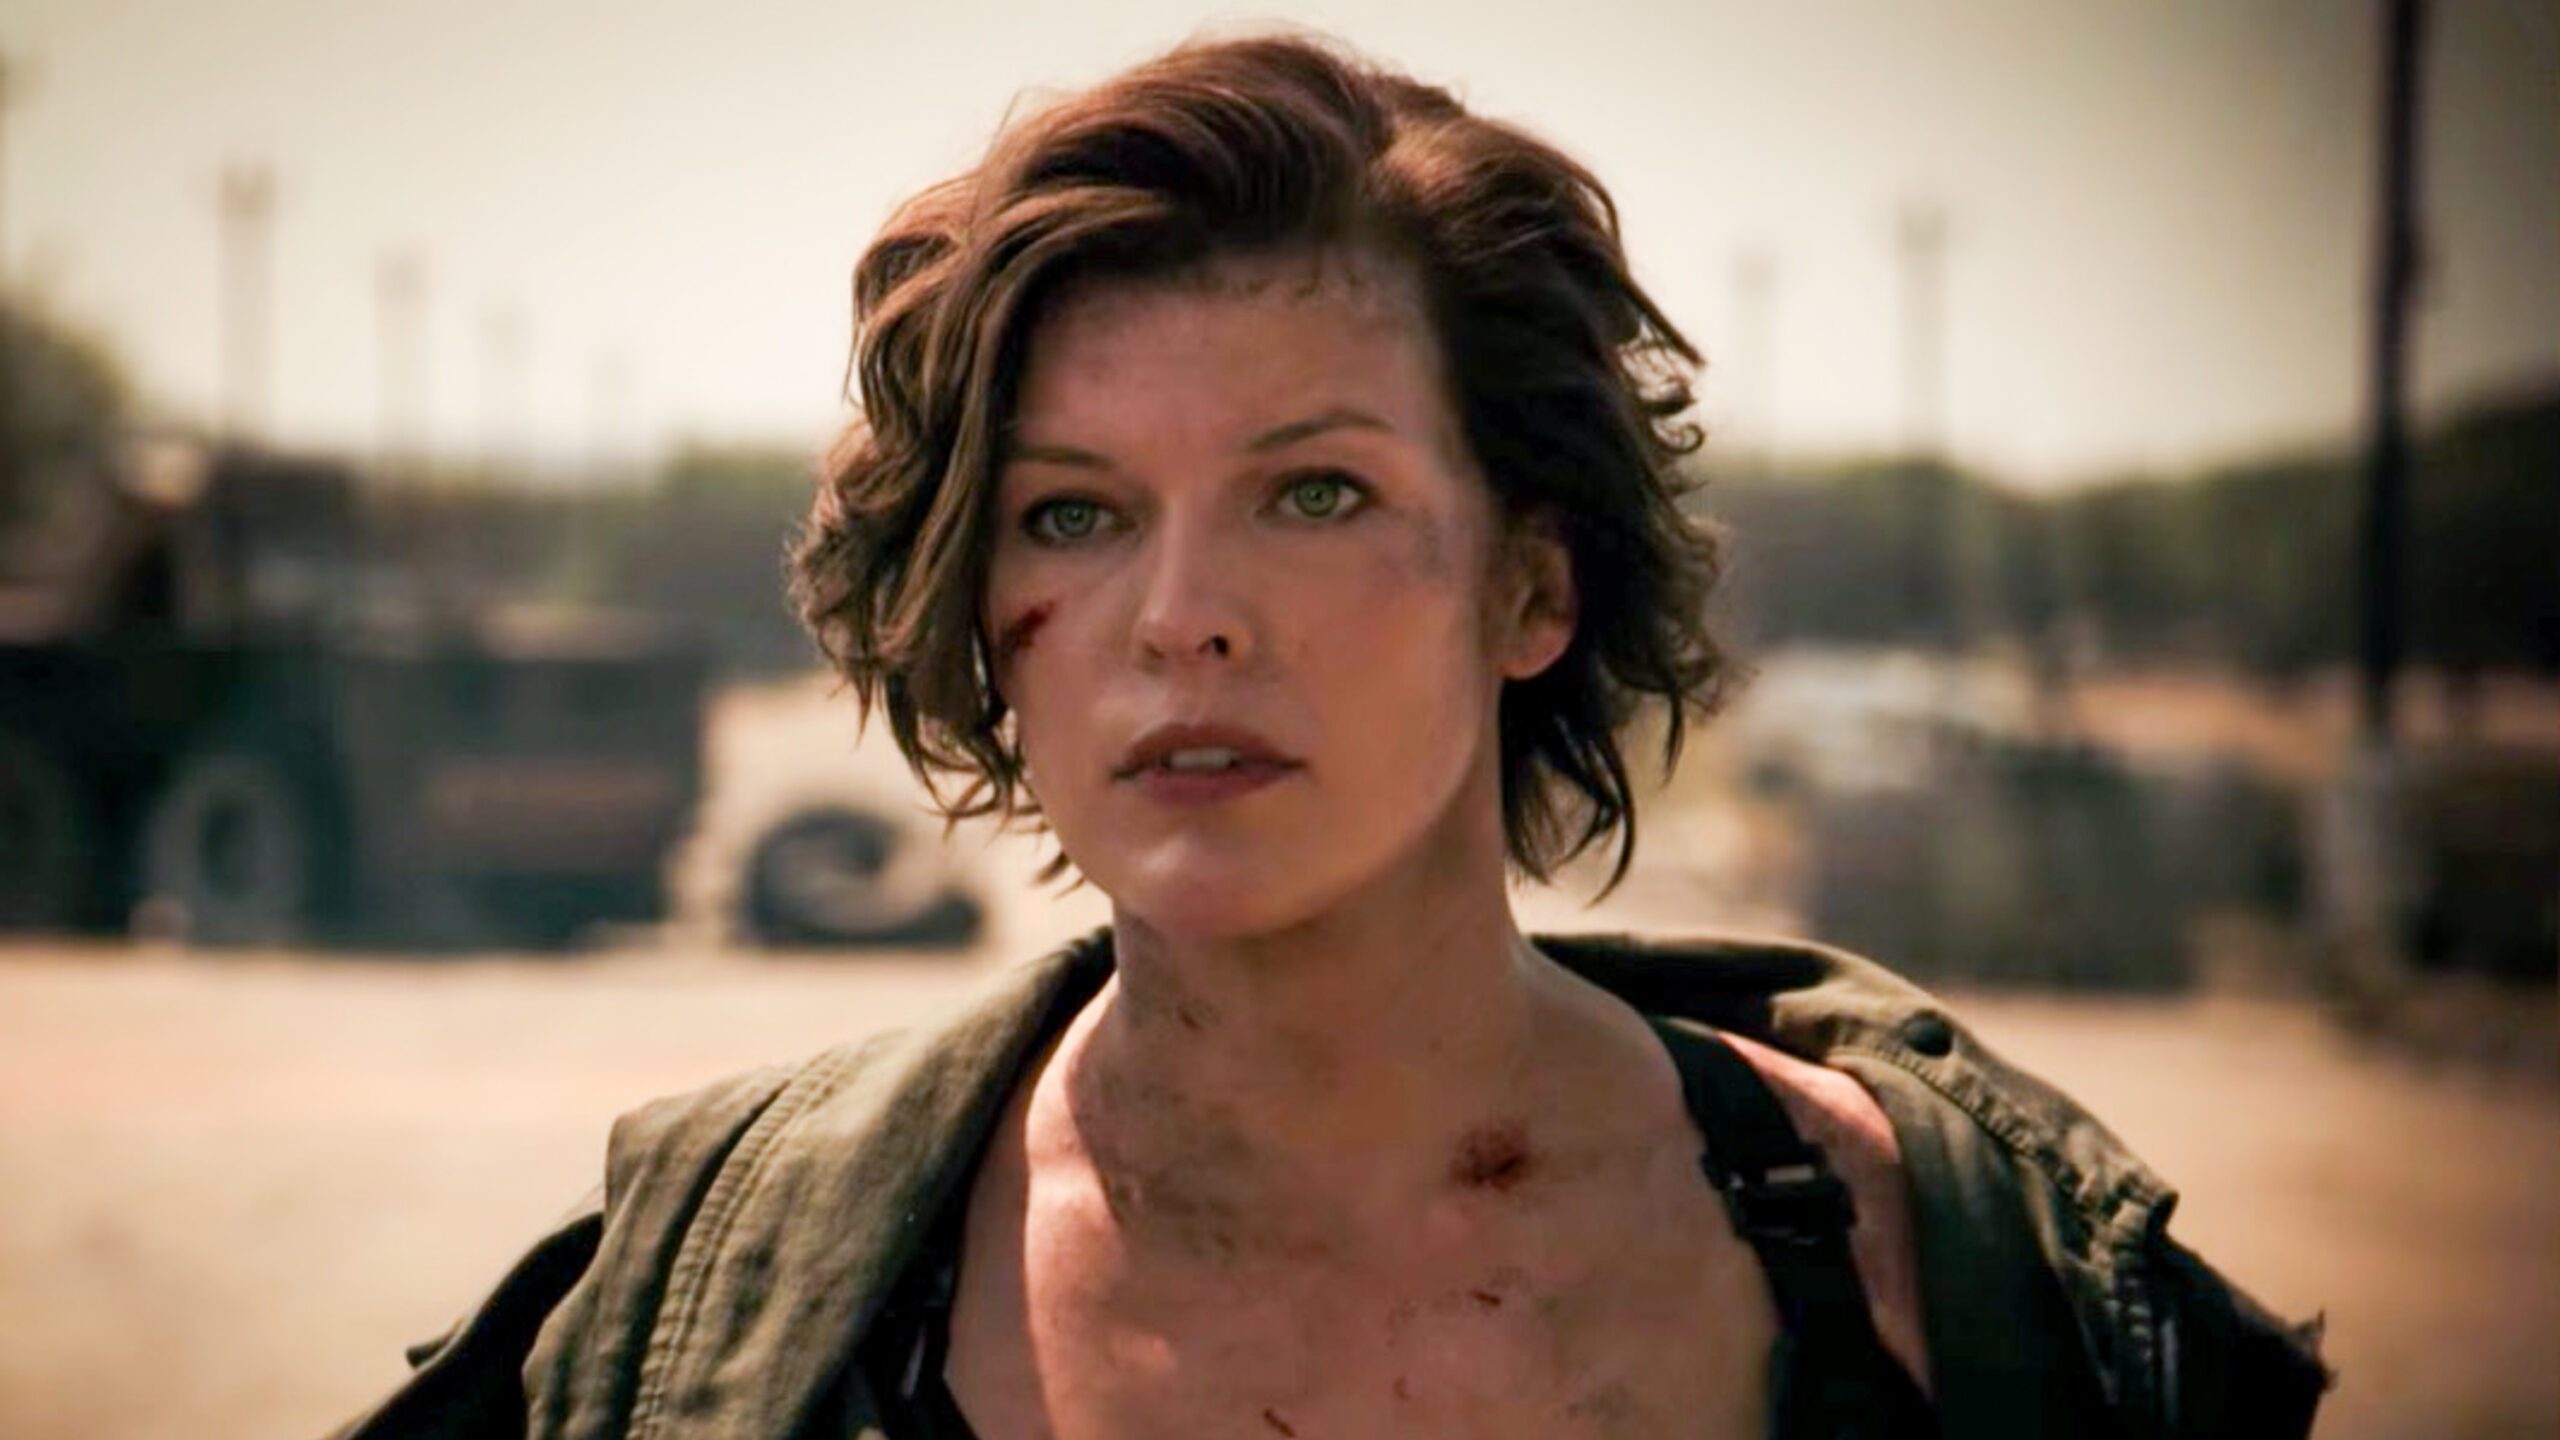 WATCH: First ‘Resident Evil: The Final Chapter’ trailer released